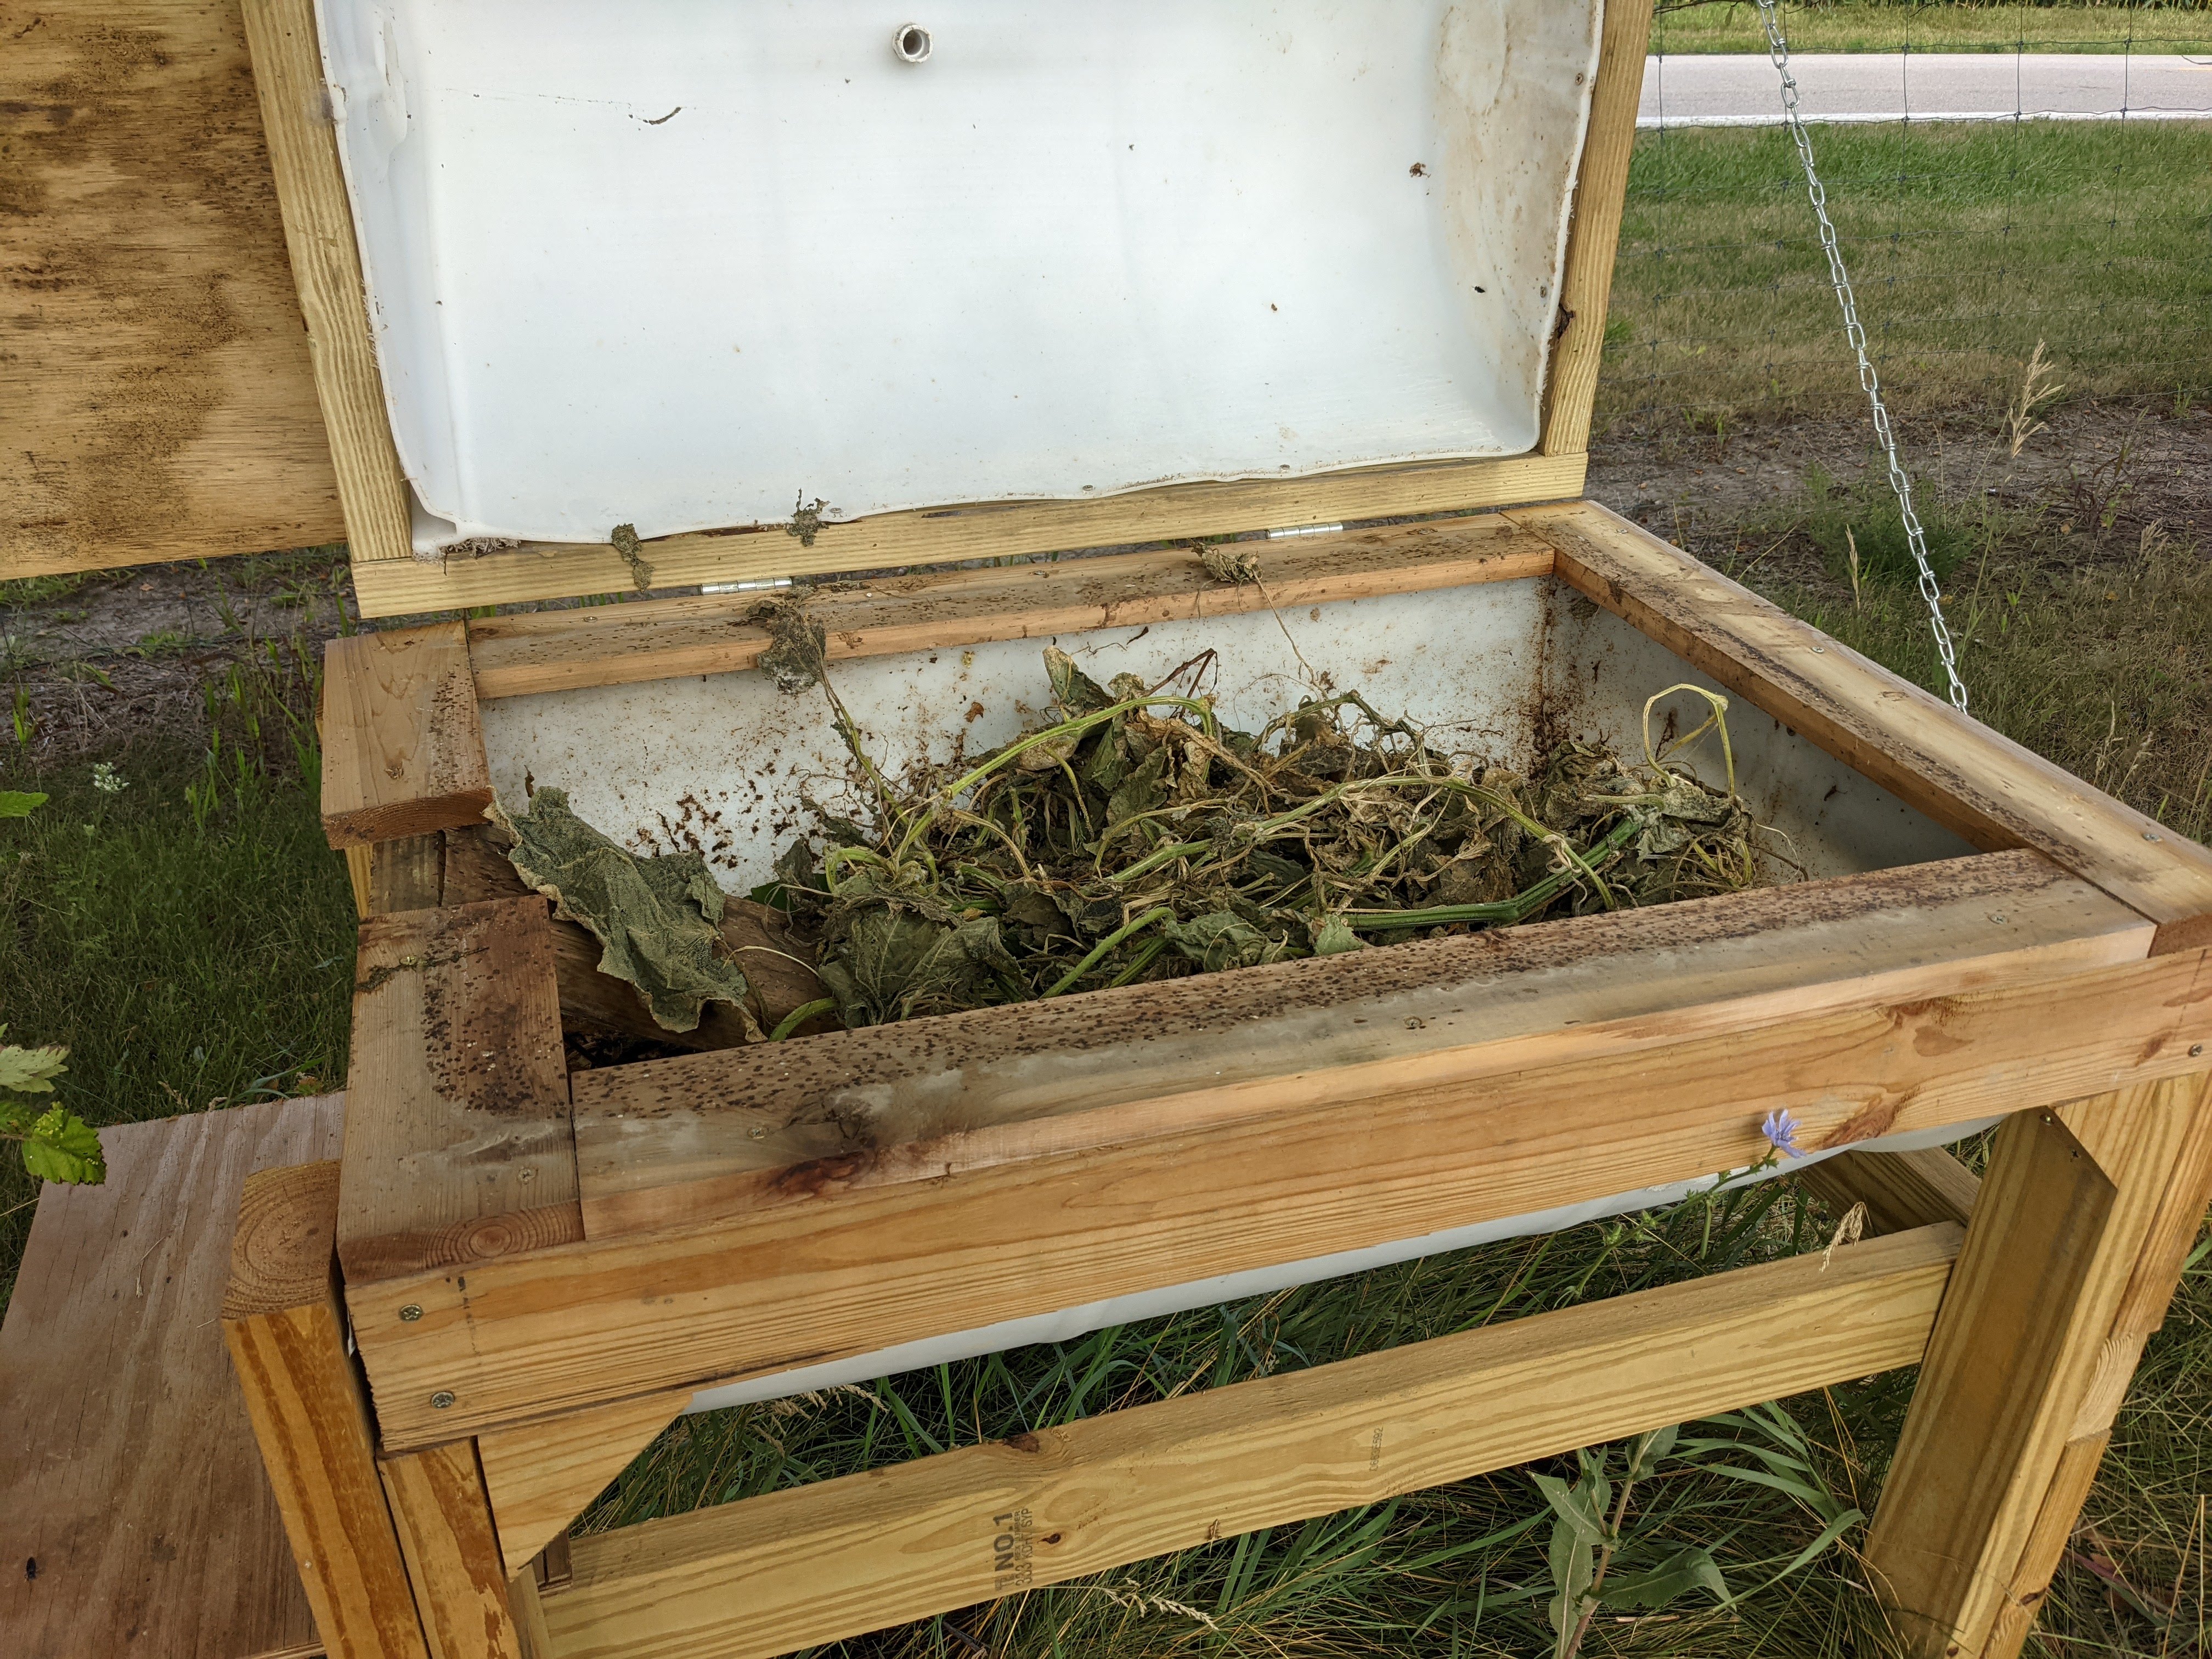 Figure 23. Inside of bin, mounted to legs and lined with 1x4 cut lumber. (<em>Photo credit: Catherine Terrell</em>)